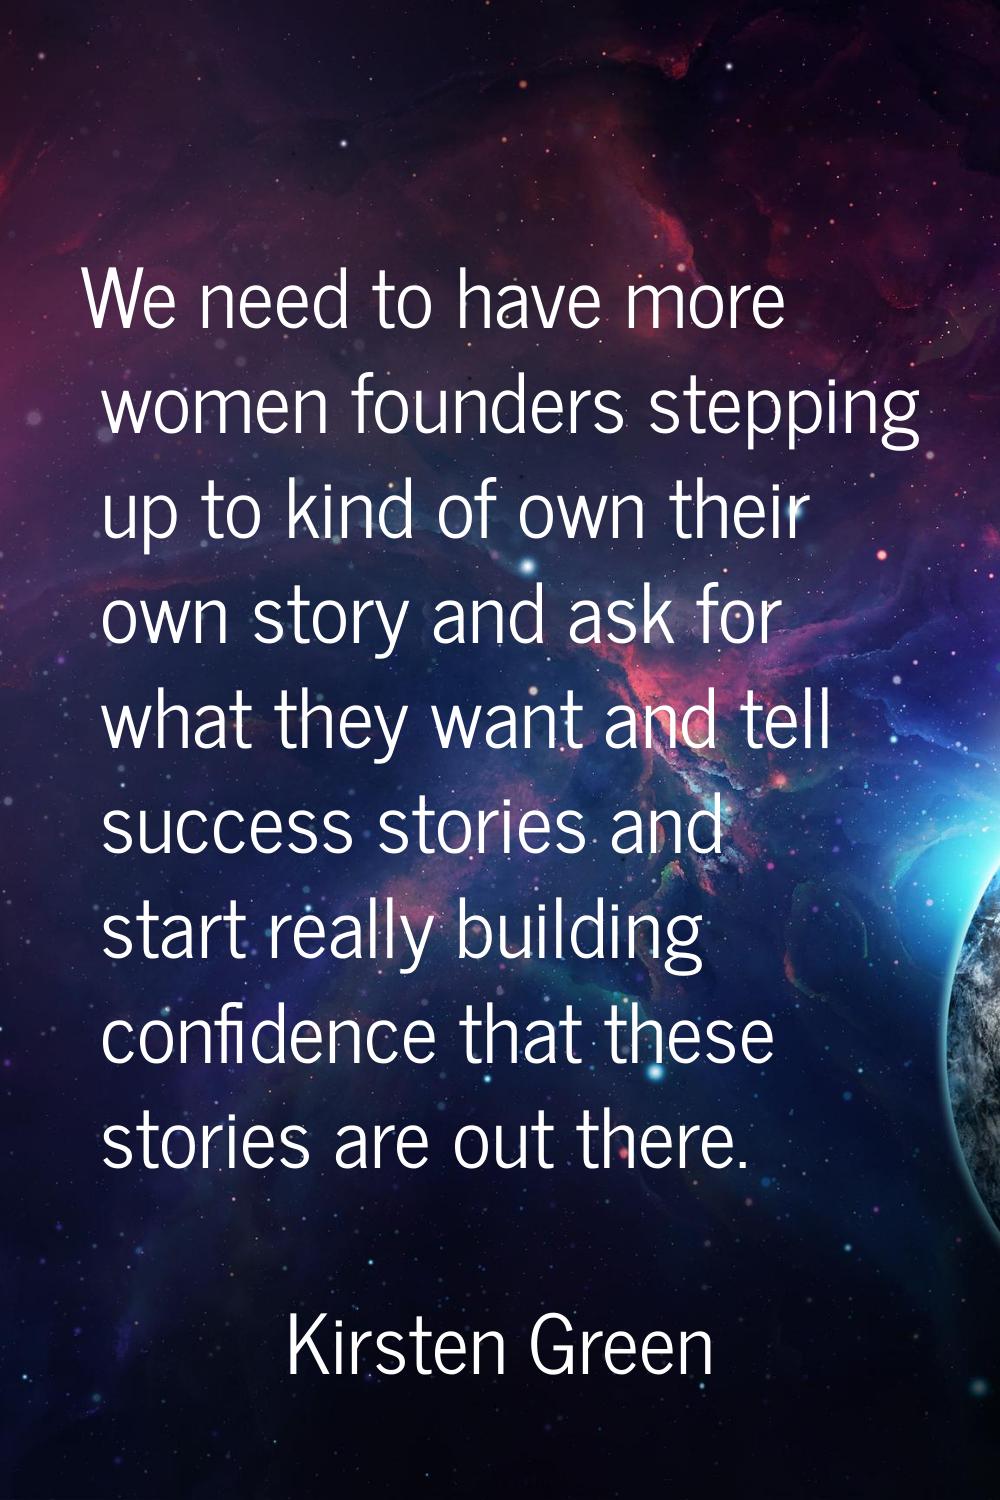 We need to have more women founders stepping up to kind of own their own story and ask for what the